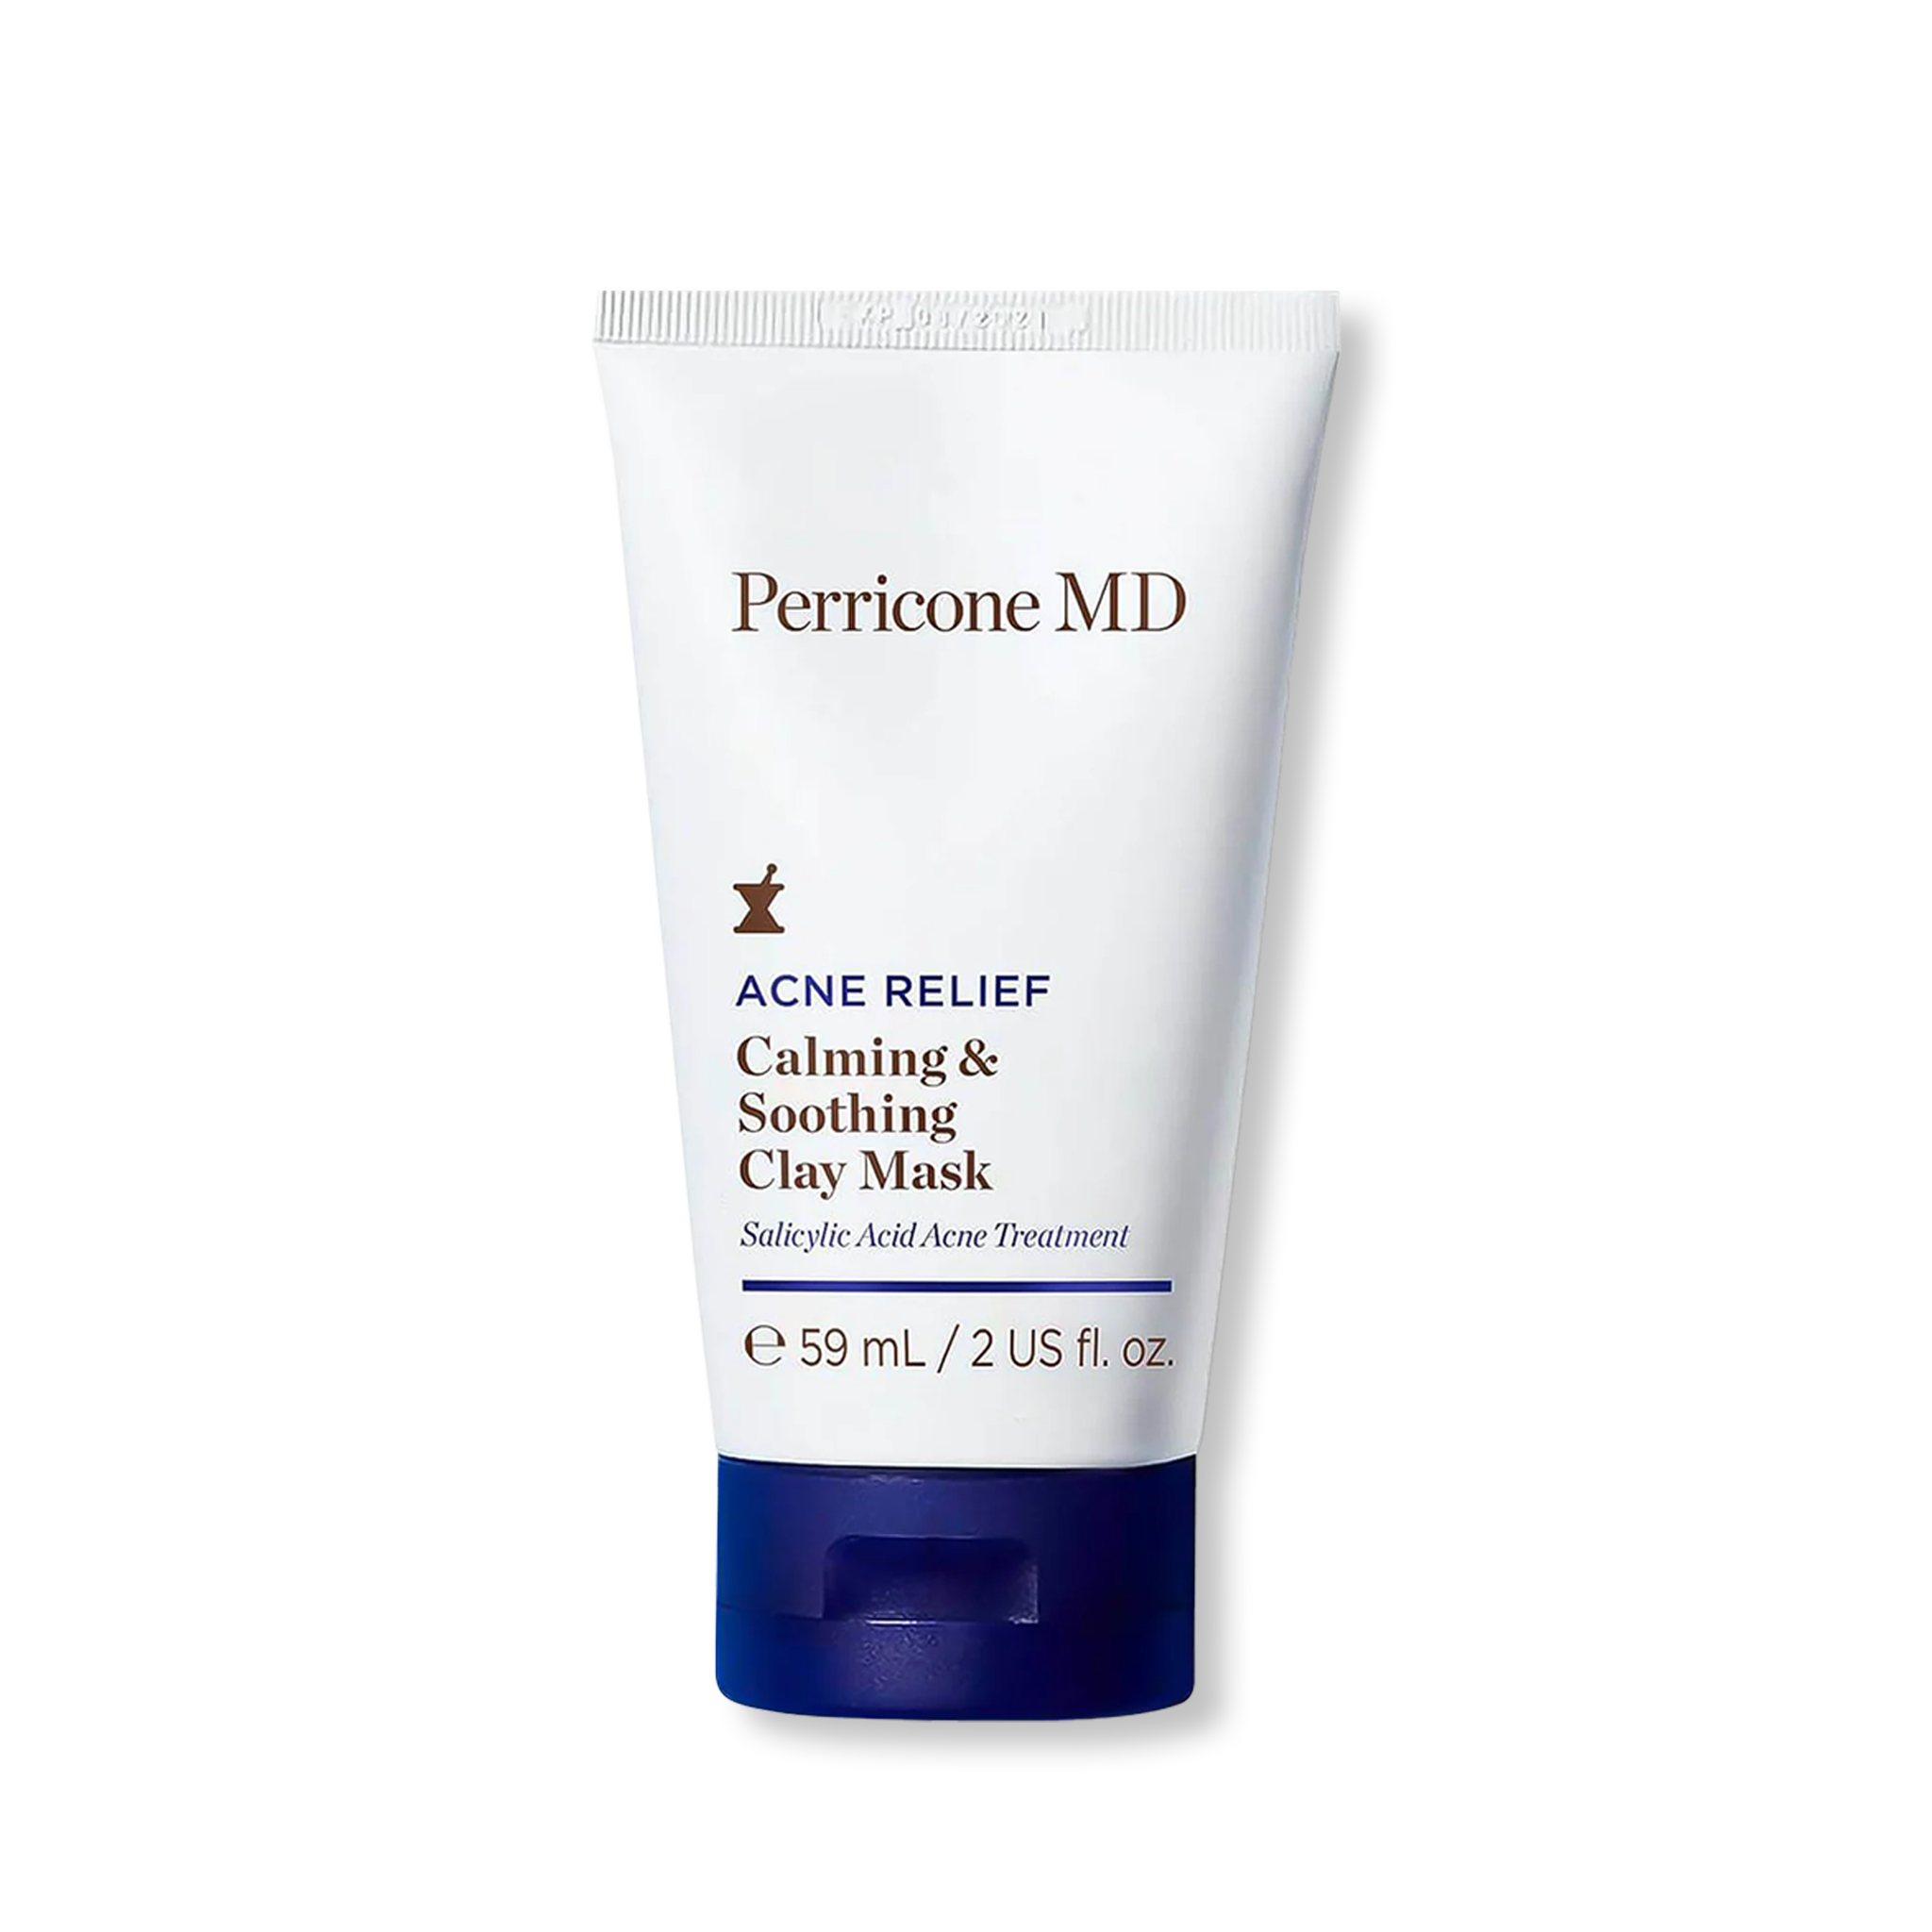 Perricone MD Acne Relief Calming and Soothing Clay Mask